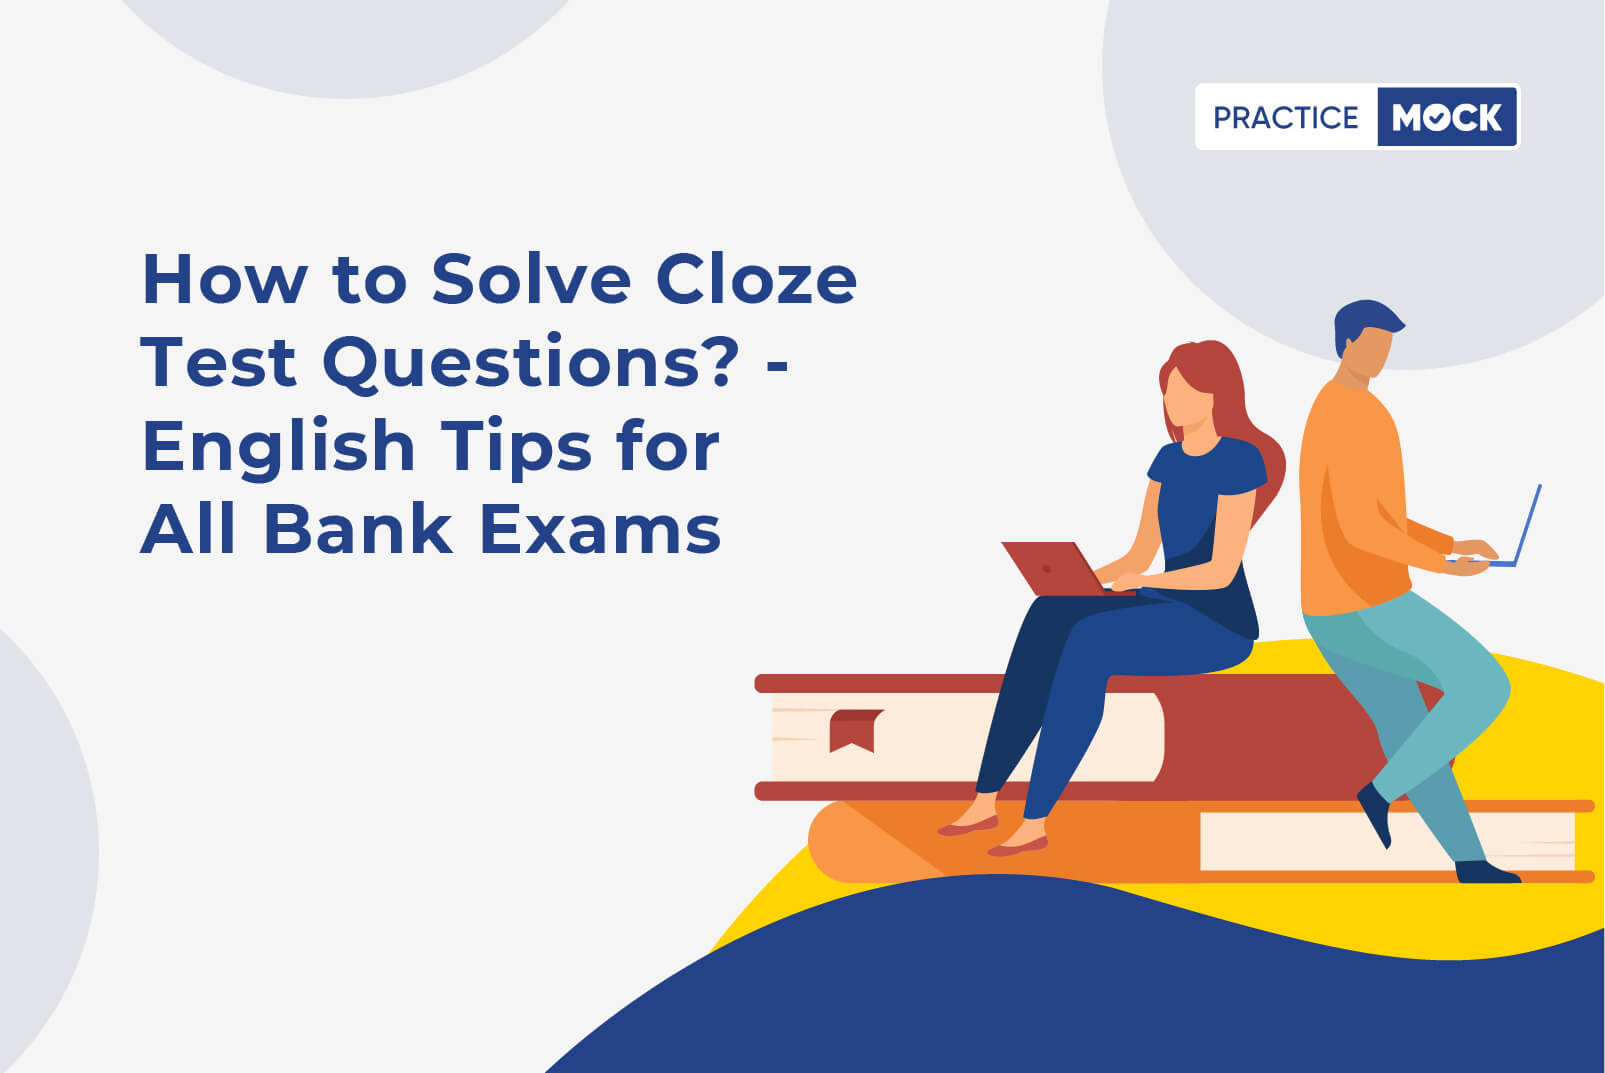 How to Solve Cloze Test Questions? -English Tips for All Bank Exams